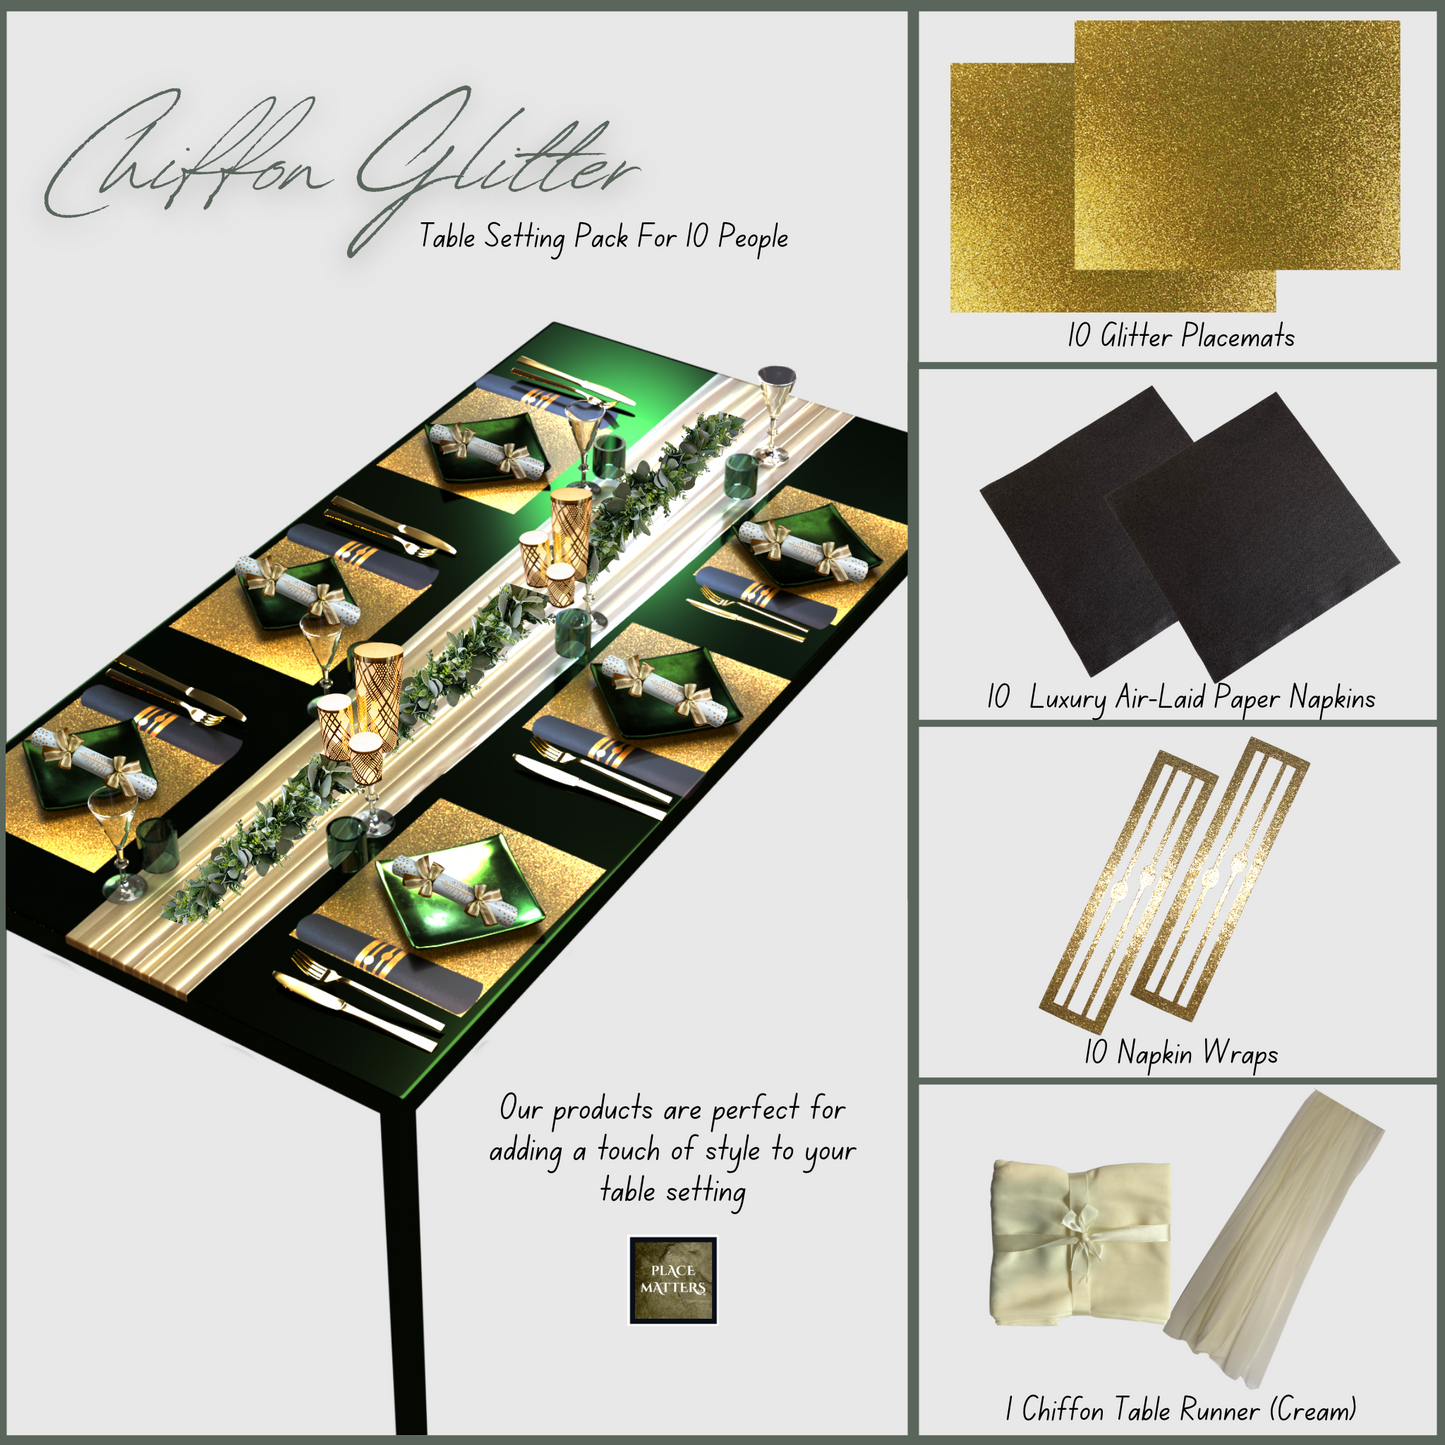 Table Setting Pack (Chiffon Glitter Design Gold Rectangle)Includes Table Runner